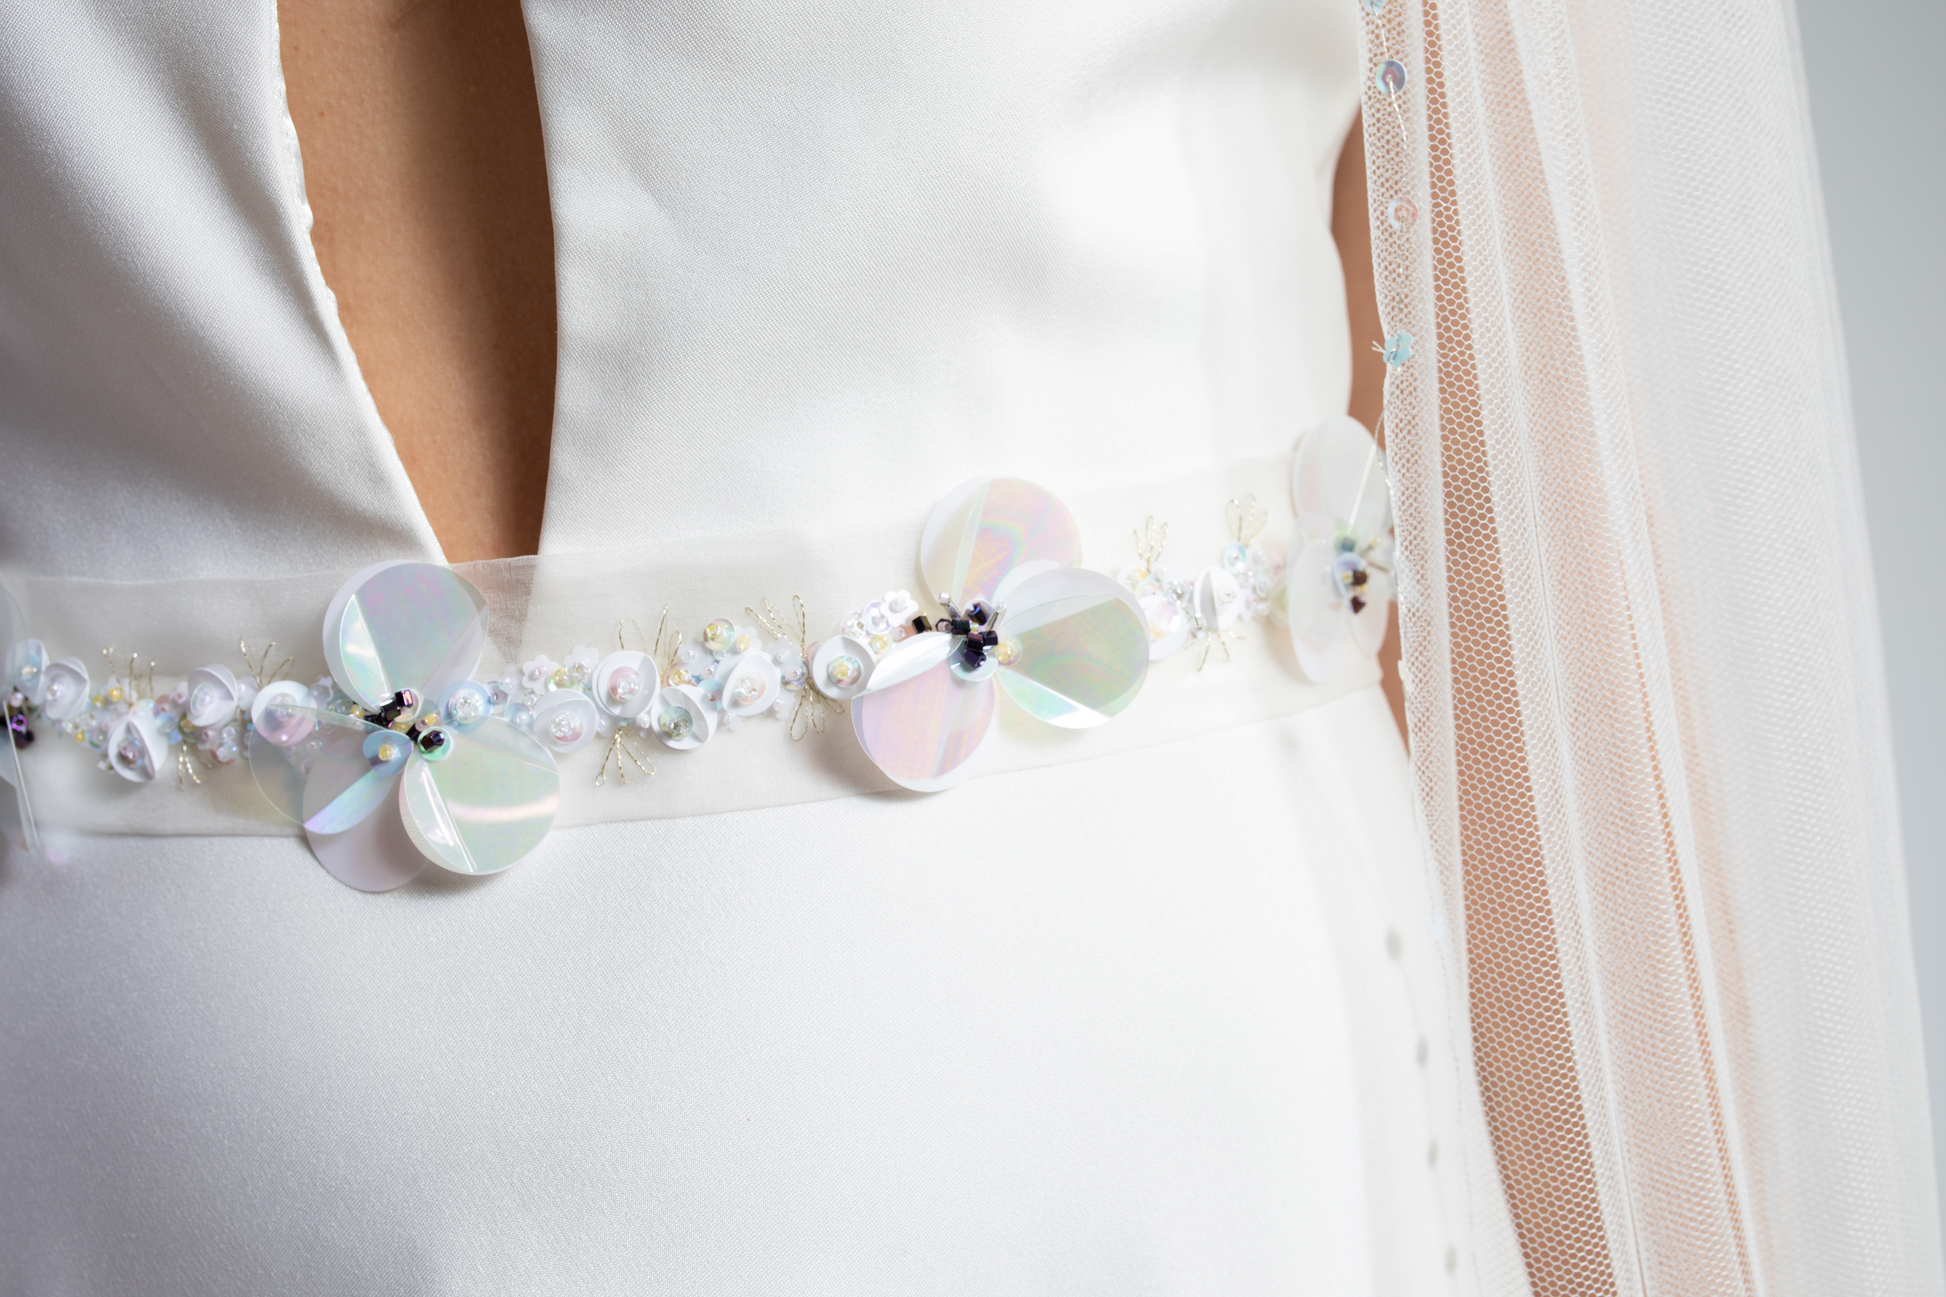 Hand-embroidered silk organza wedding belt decorated with hand-sewn sequins and beads in a floral design.  This embellished bridal belt is part of a collection of luxury hand-made bridal accessories.